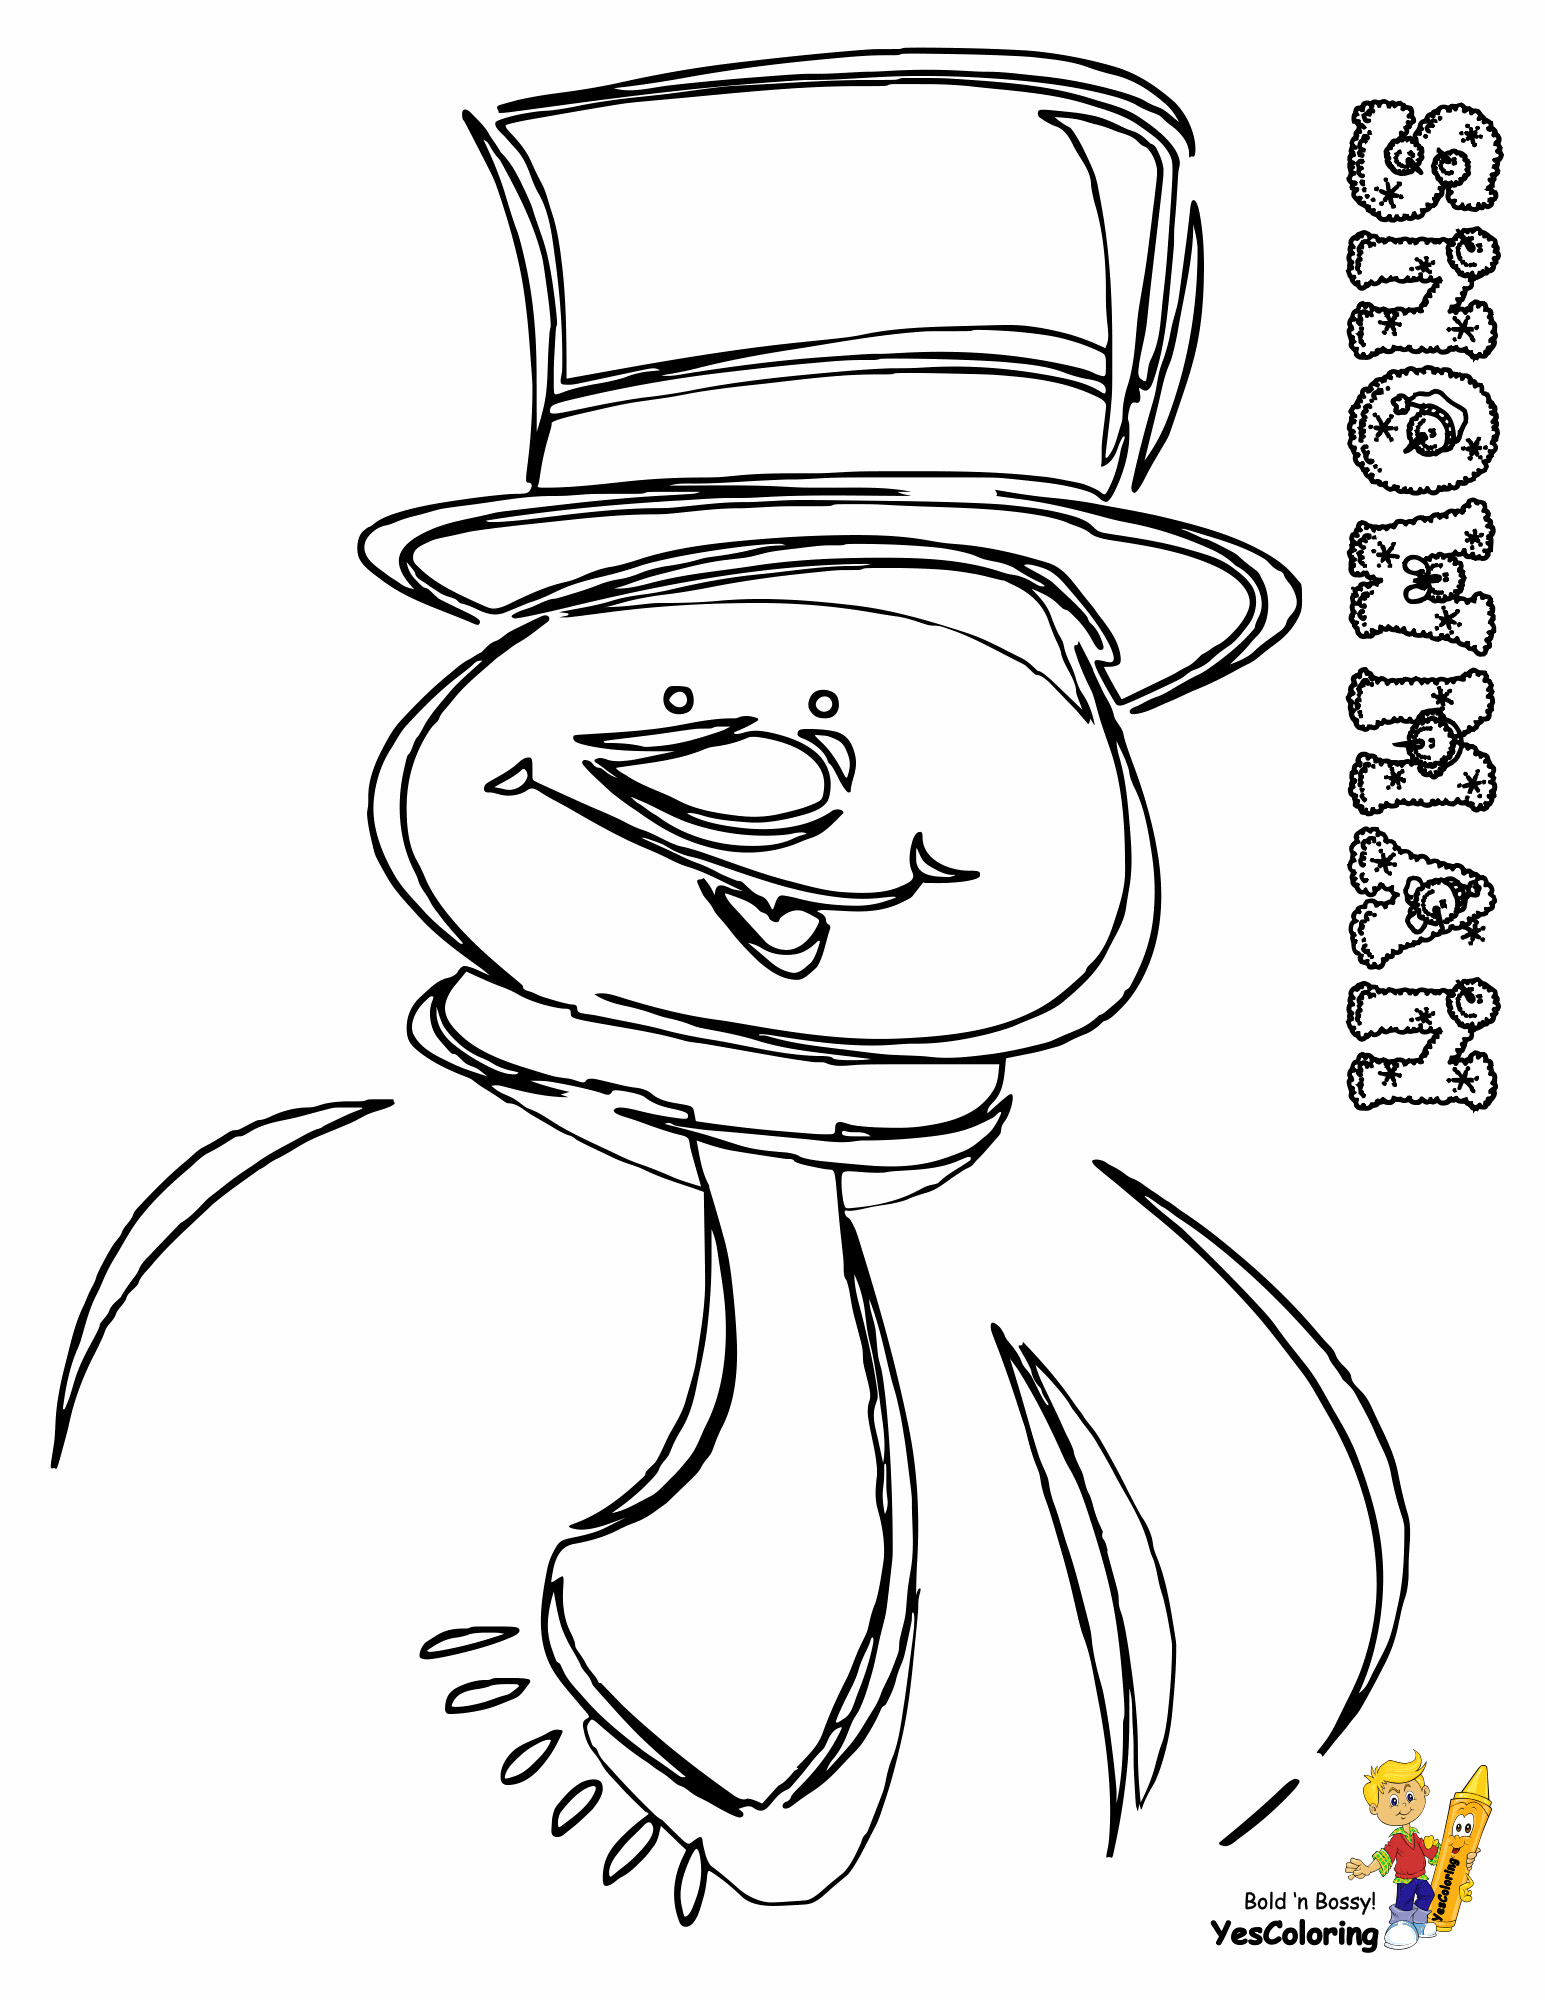 Cool Coloring Sheets Printable For Boys
 Cool Coloring Pages to Print Christmas Free